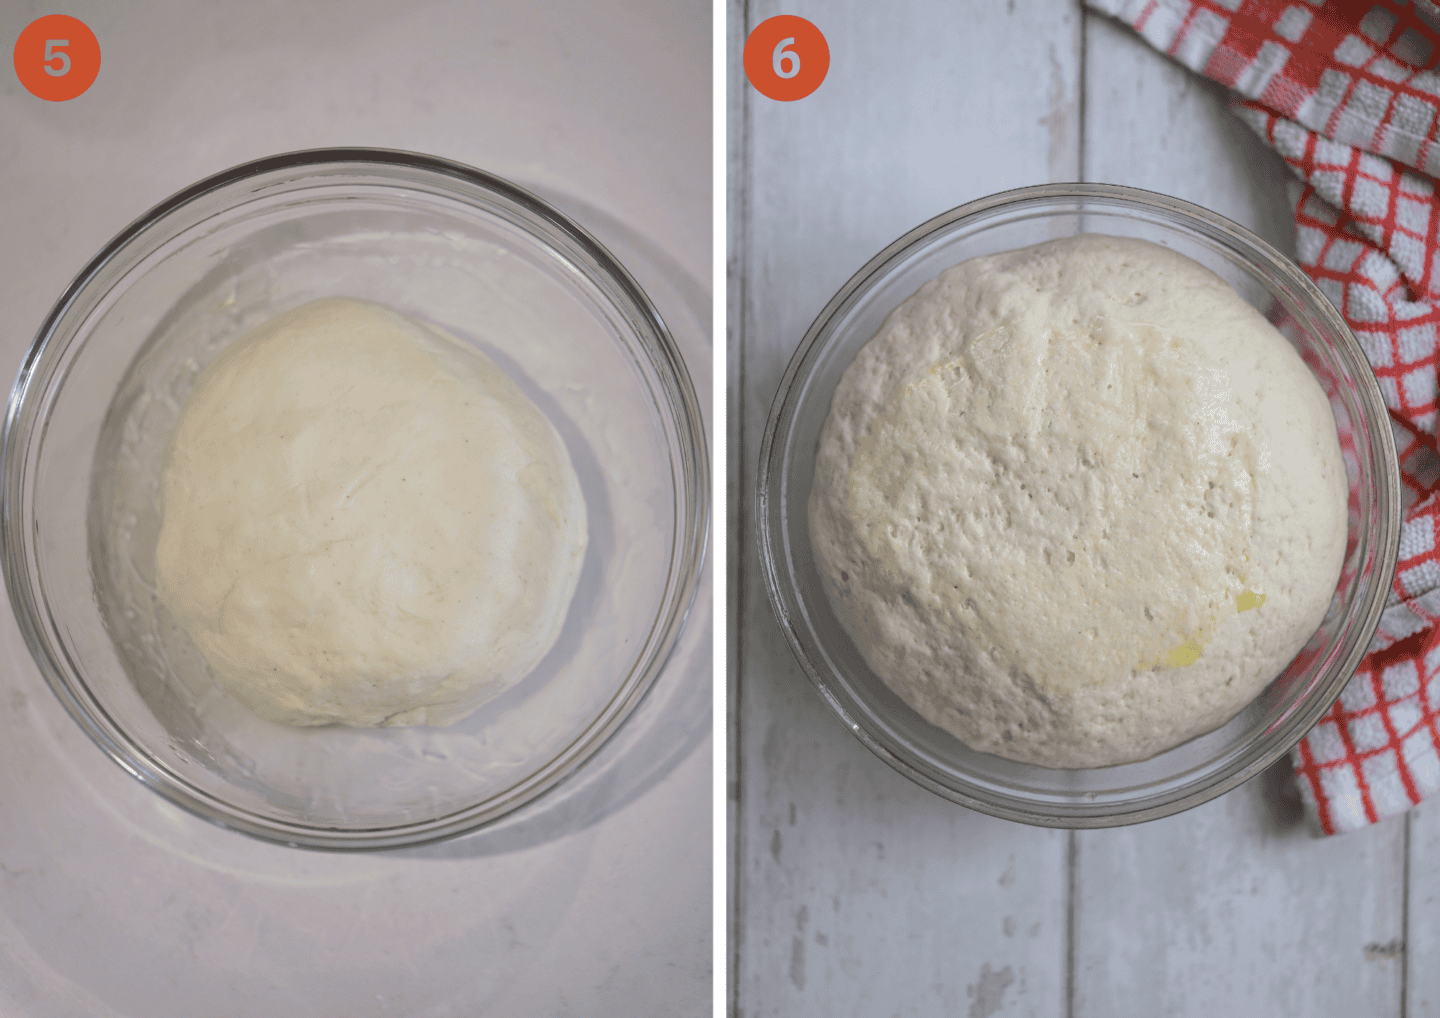 The caputo gluten free pizza dough before and after proving.